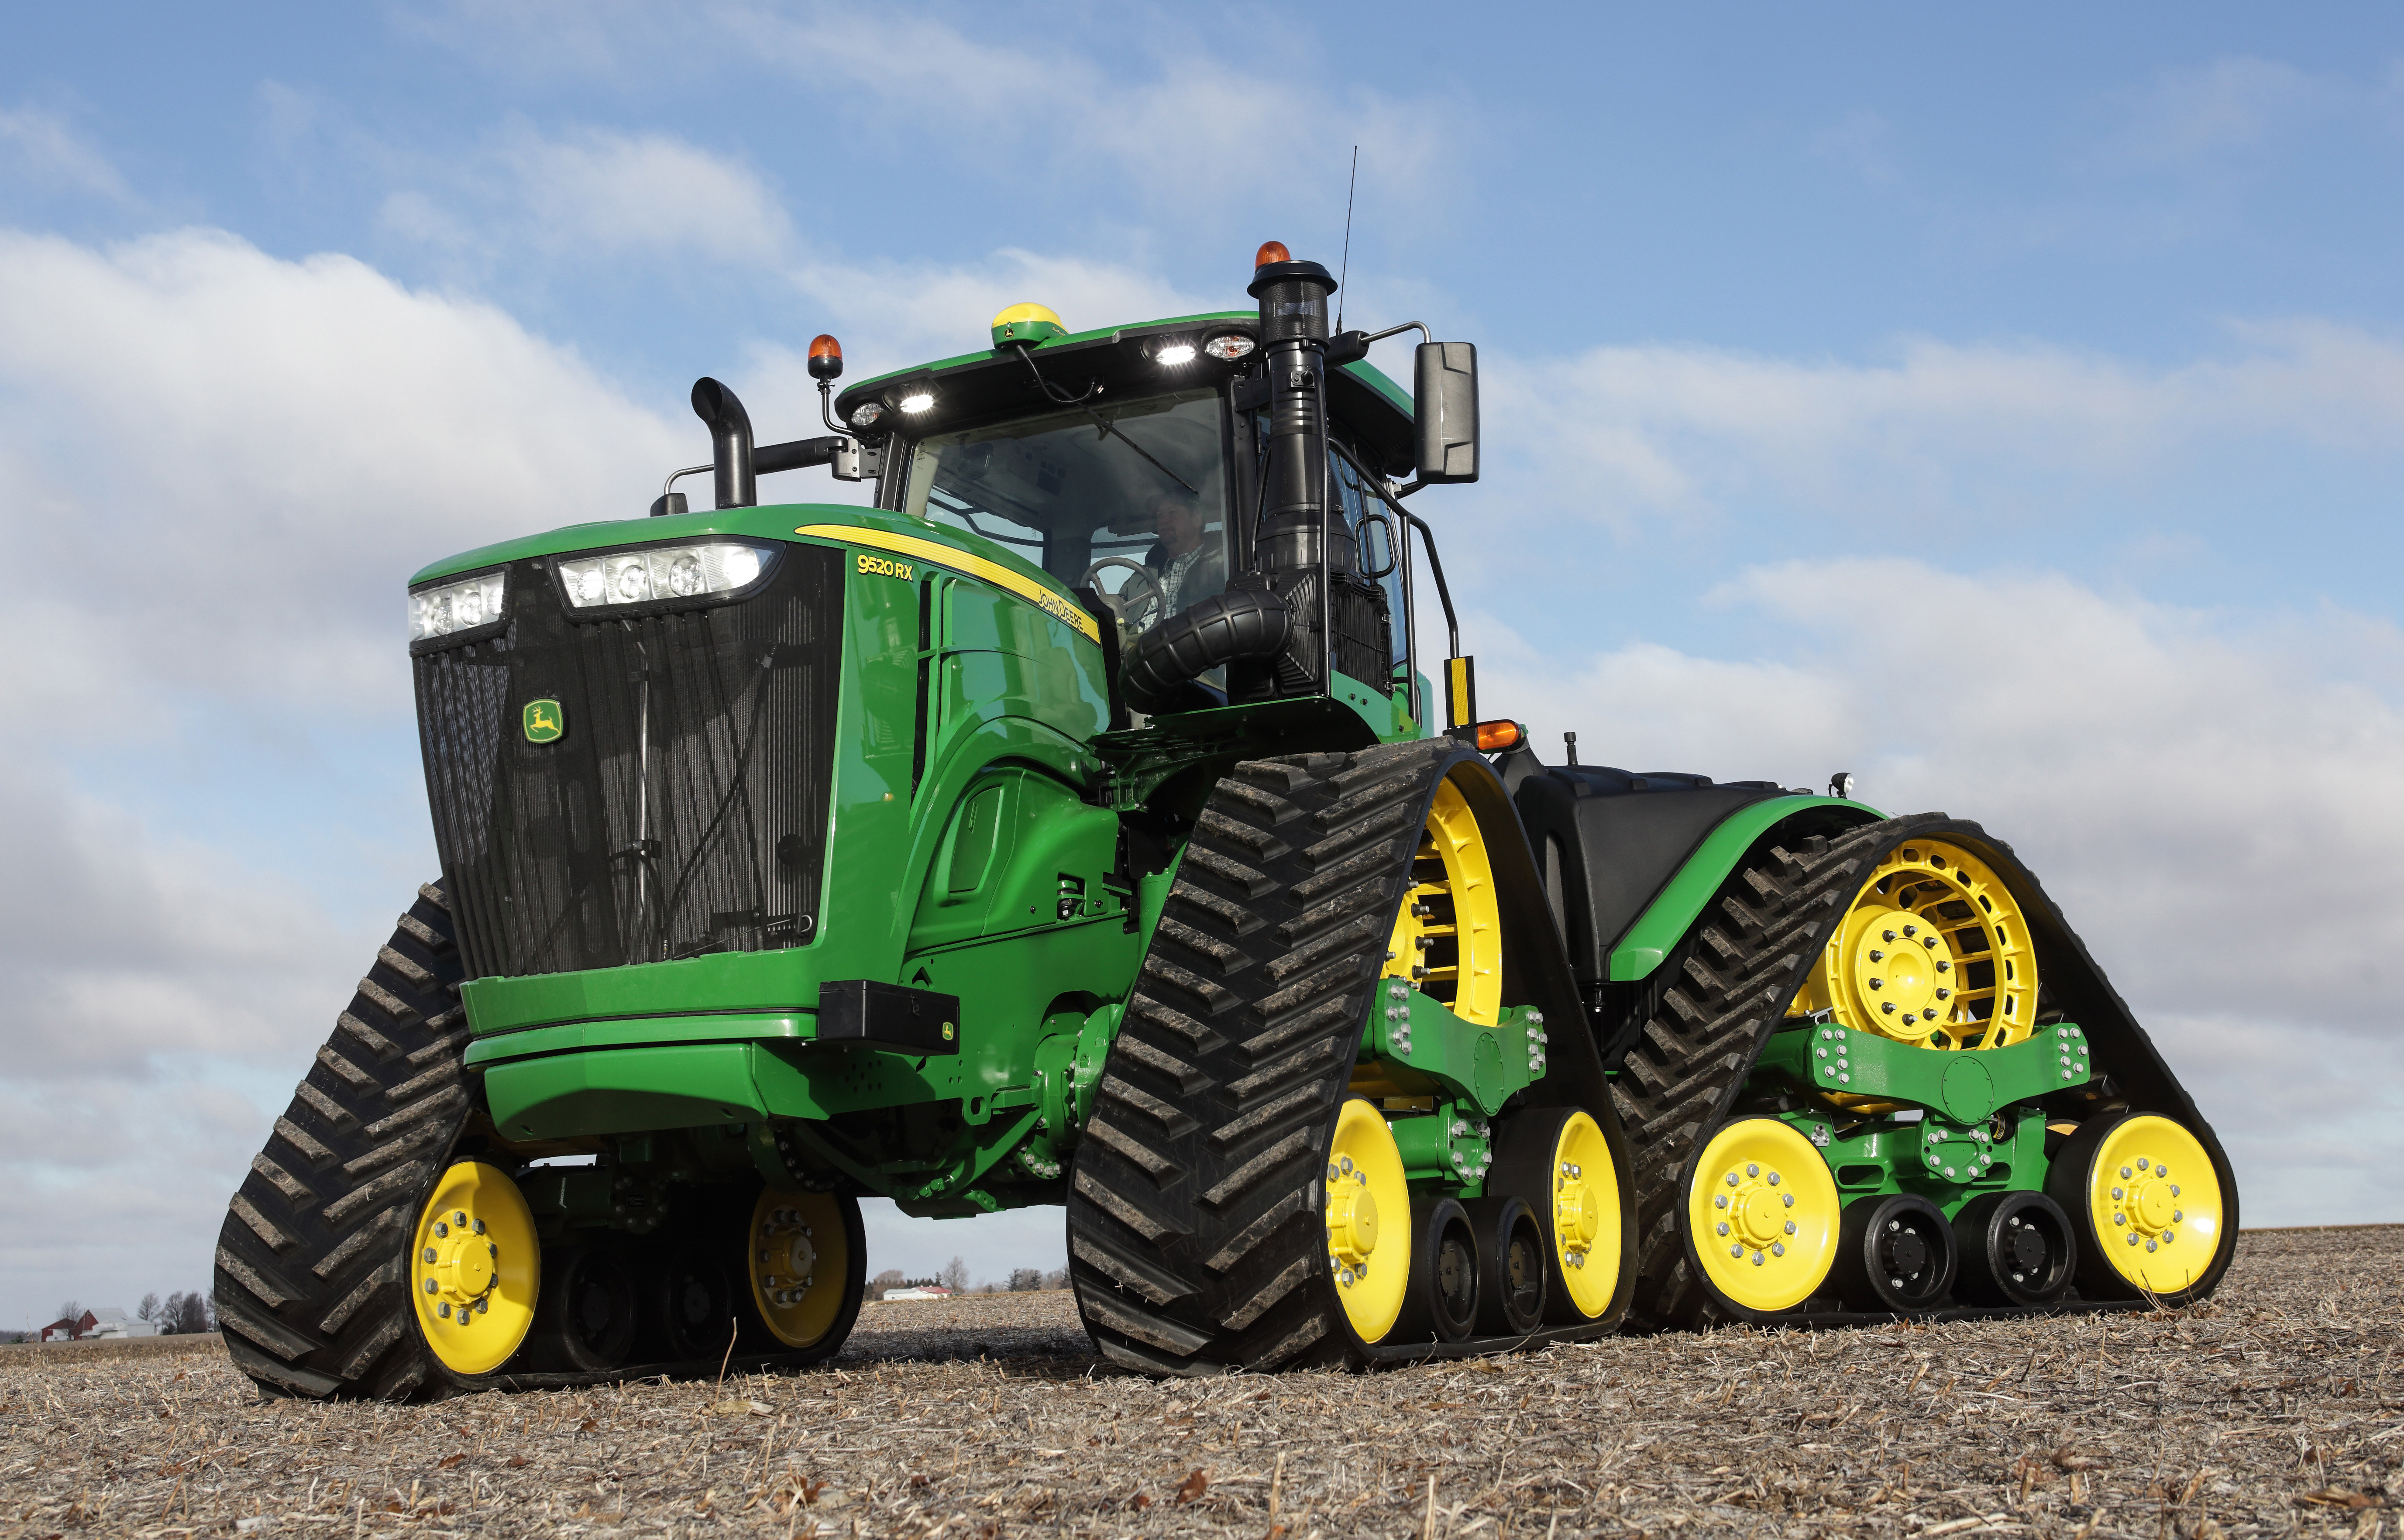 John Deere 9R Family of Tractors Get New Updates Including a Mix of Performance-Enhancing Tech